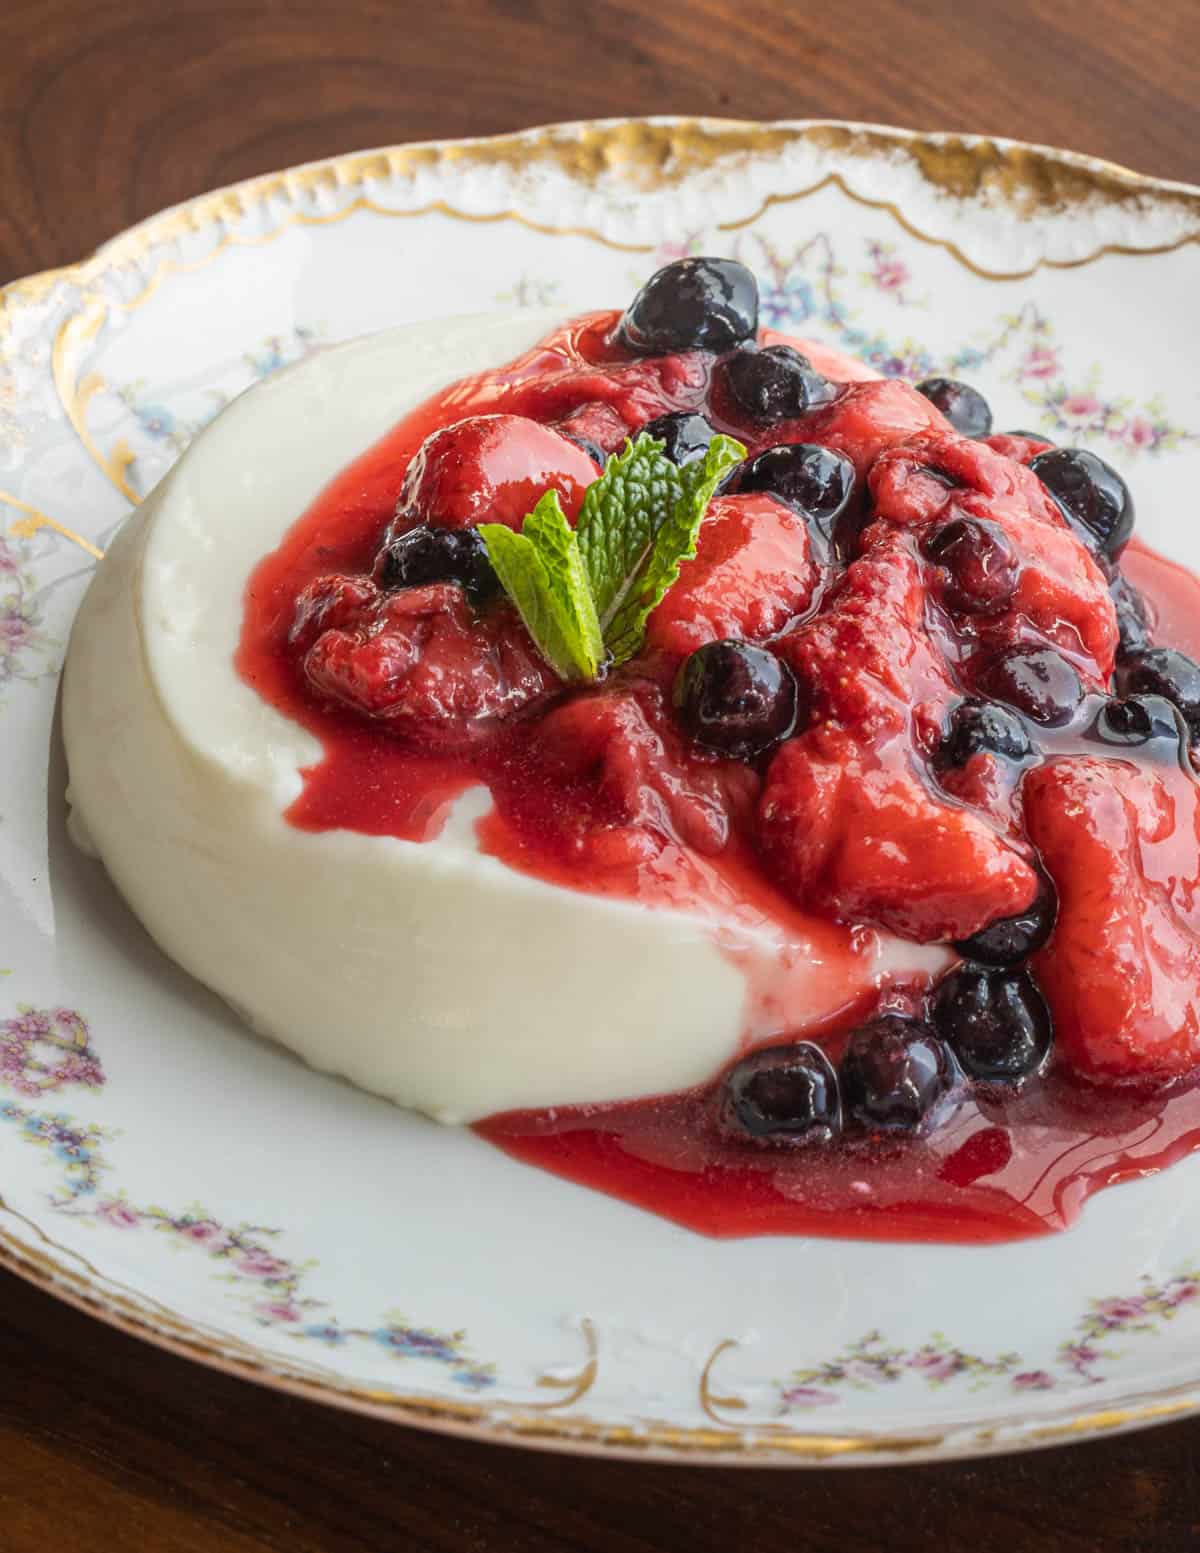 A panna cotta topped with stewed strawberries and blueberries on a china plate.